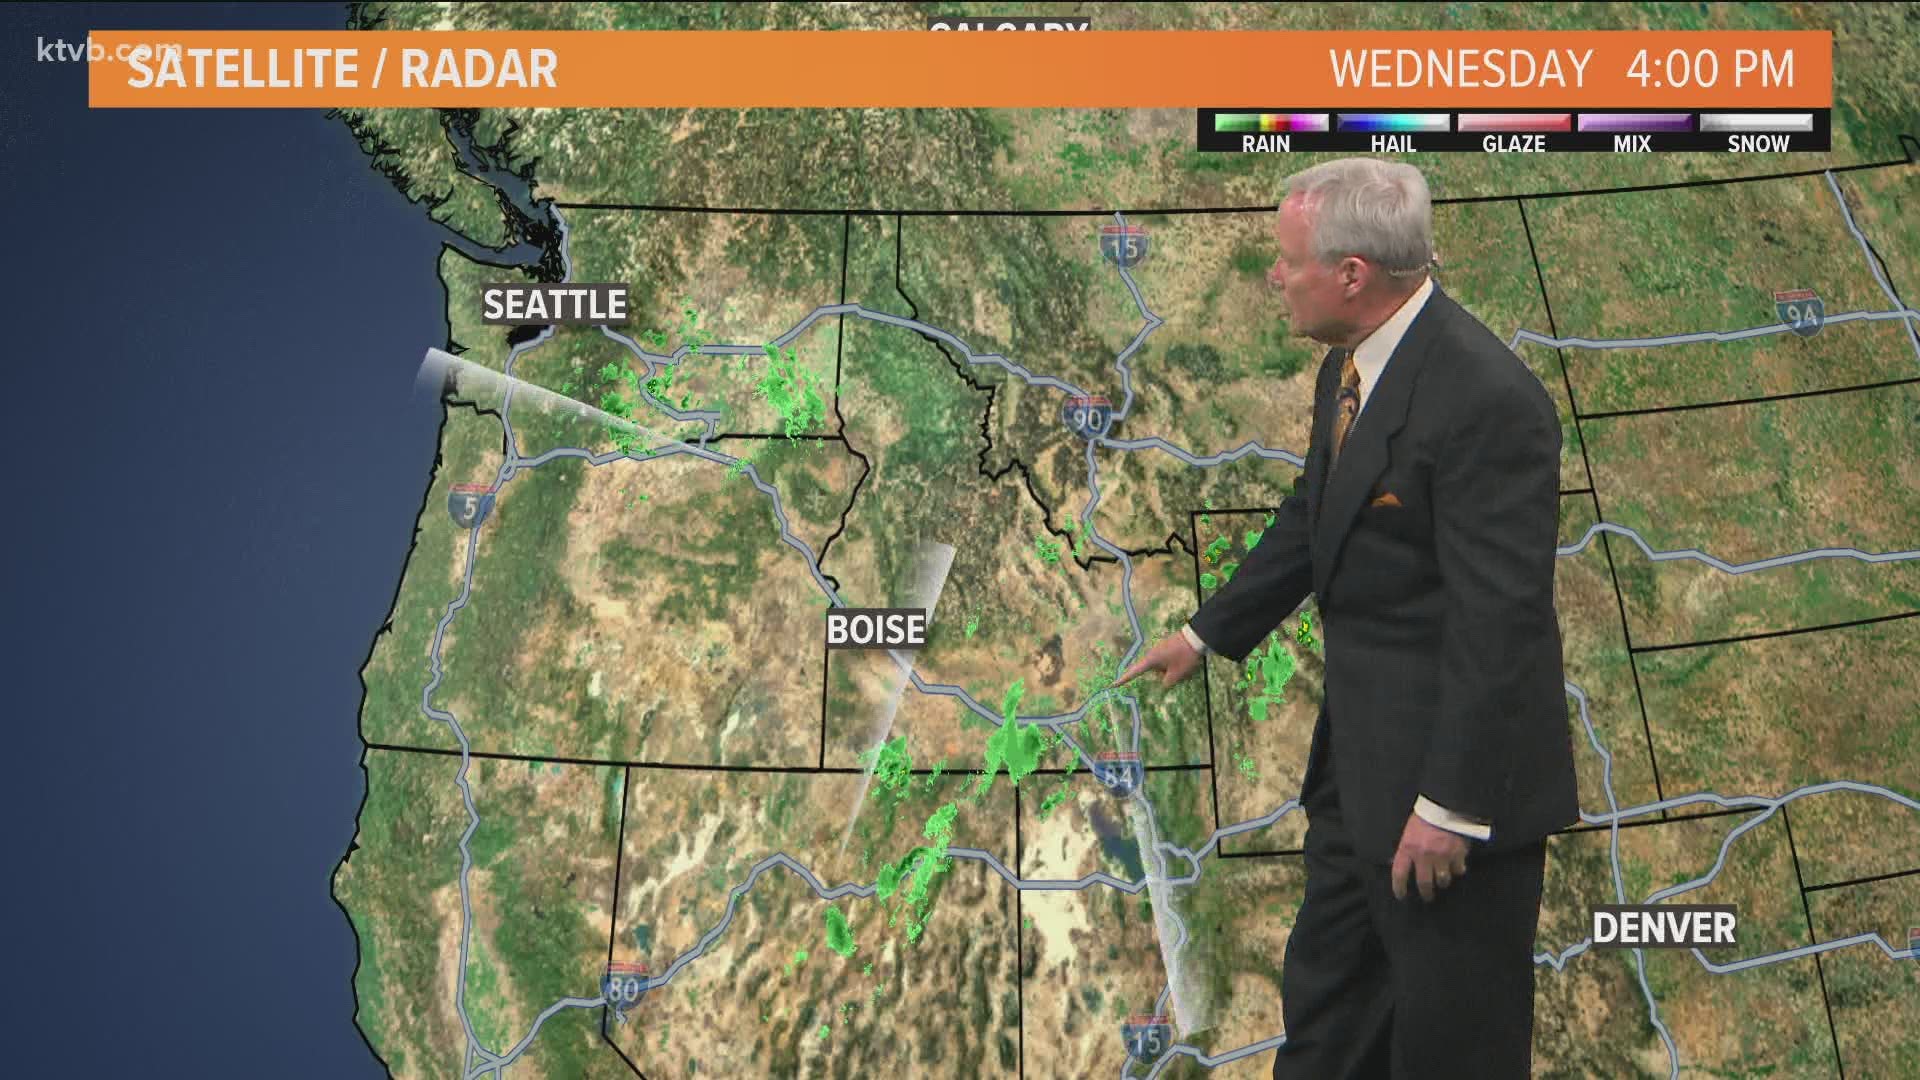 Rick Lantz says radar is his favorite weather tool. He explains what it will be like without it for a week.